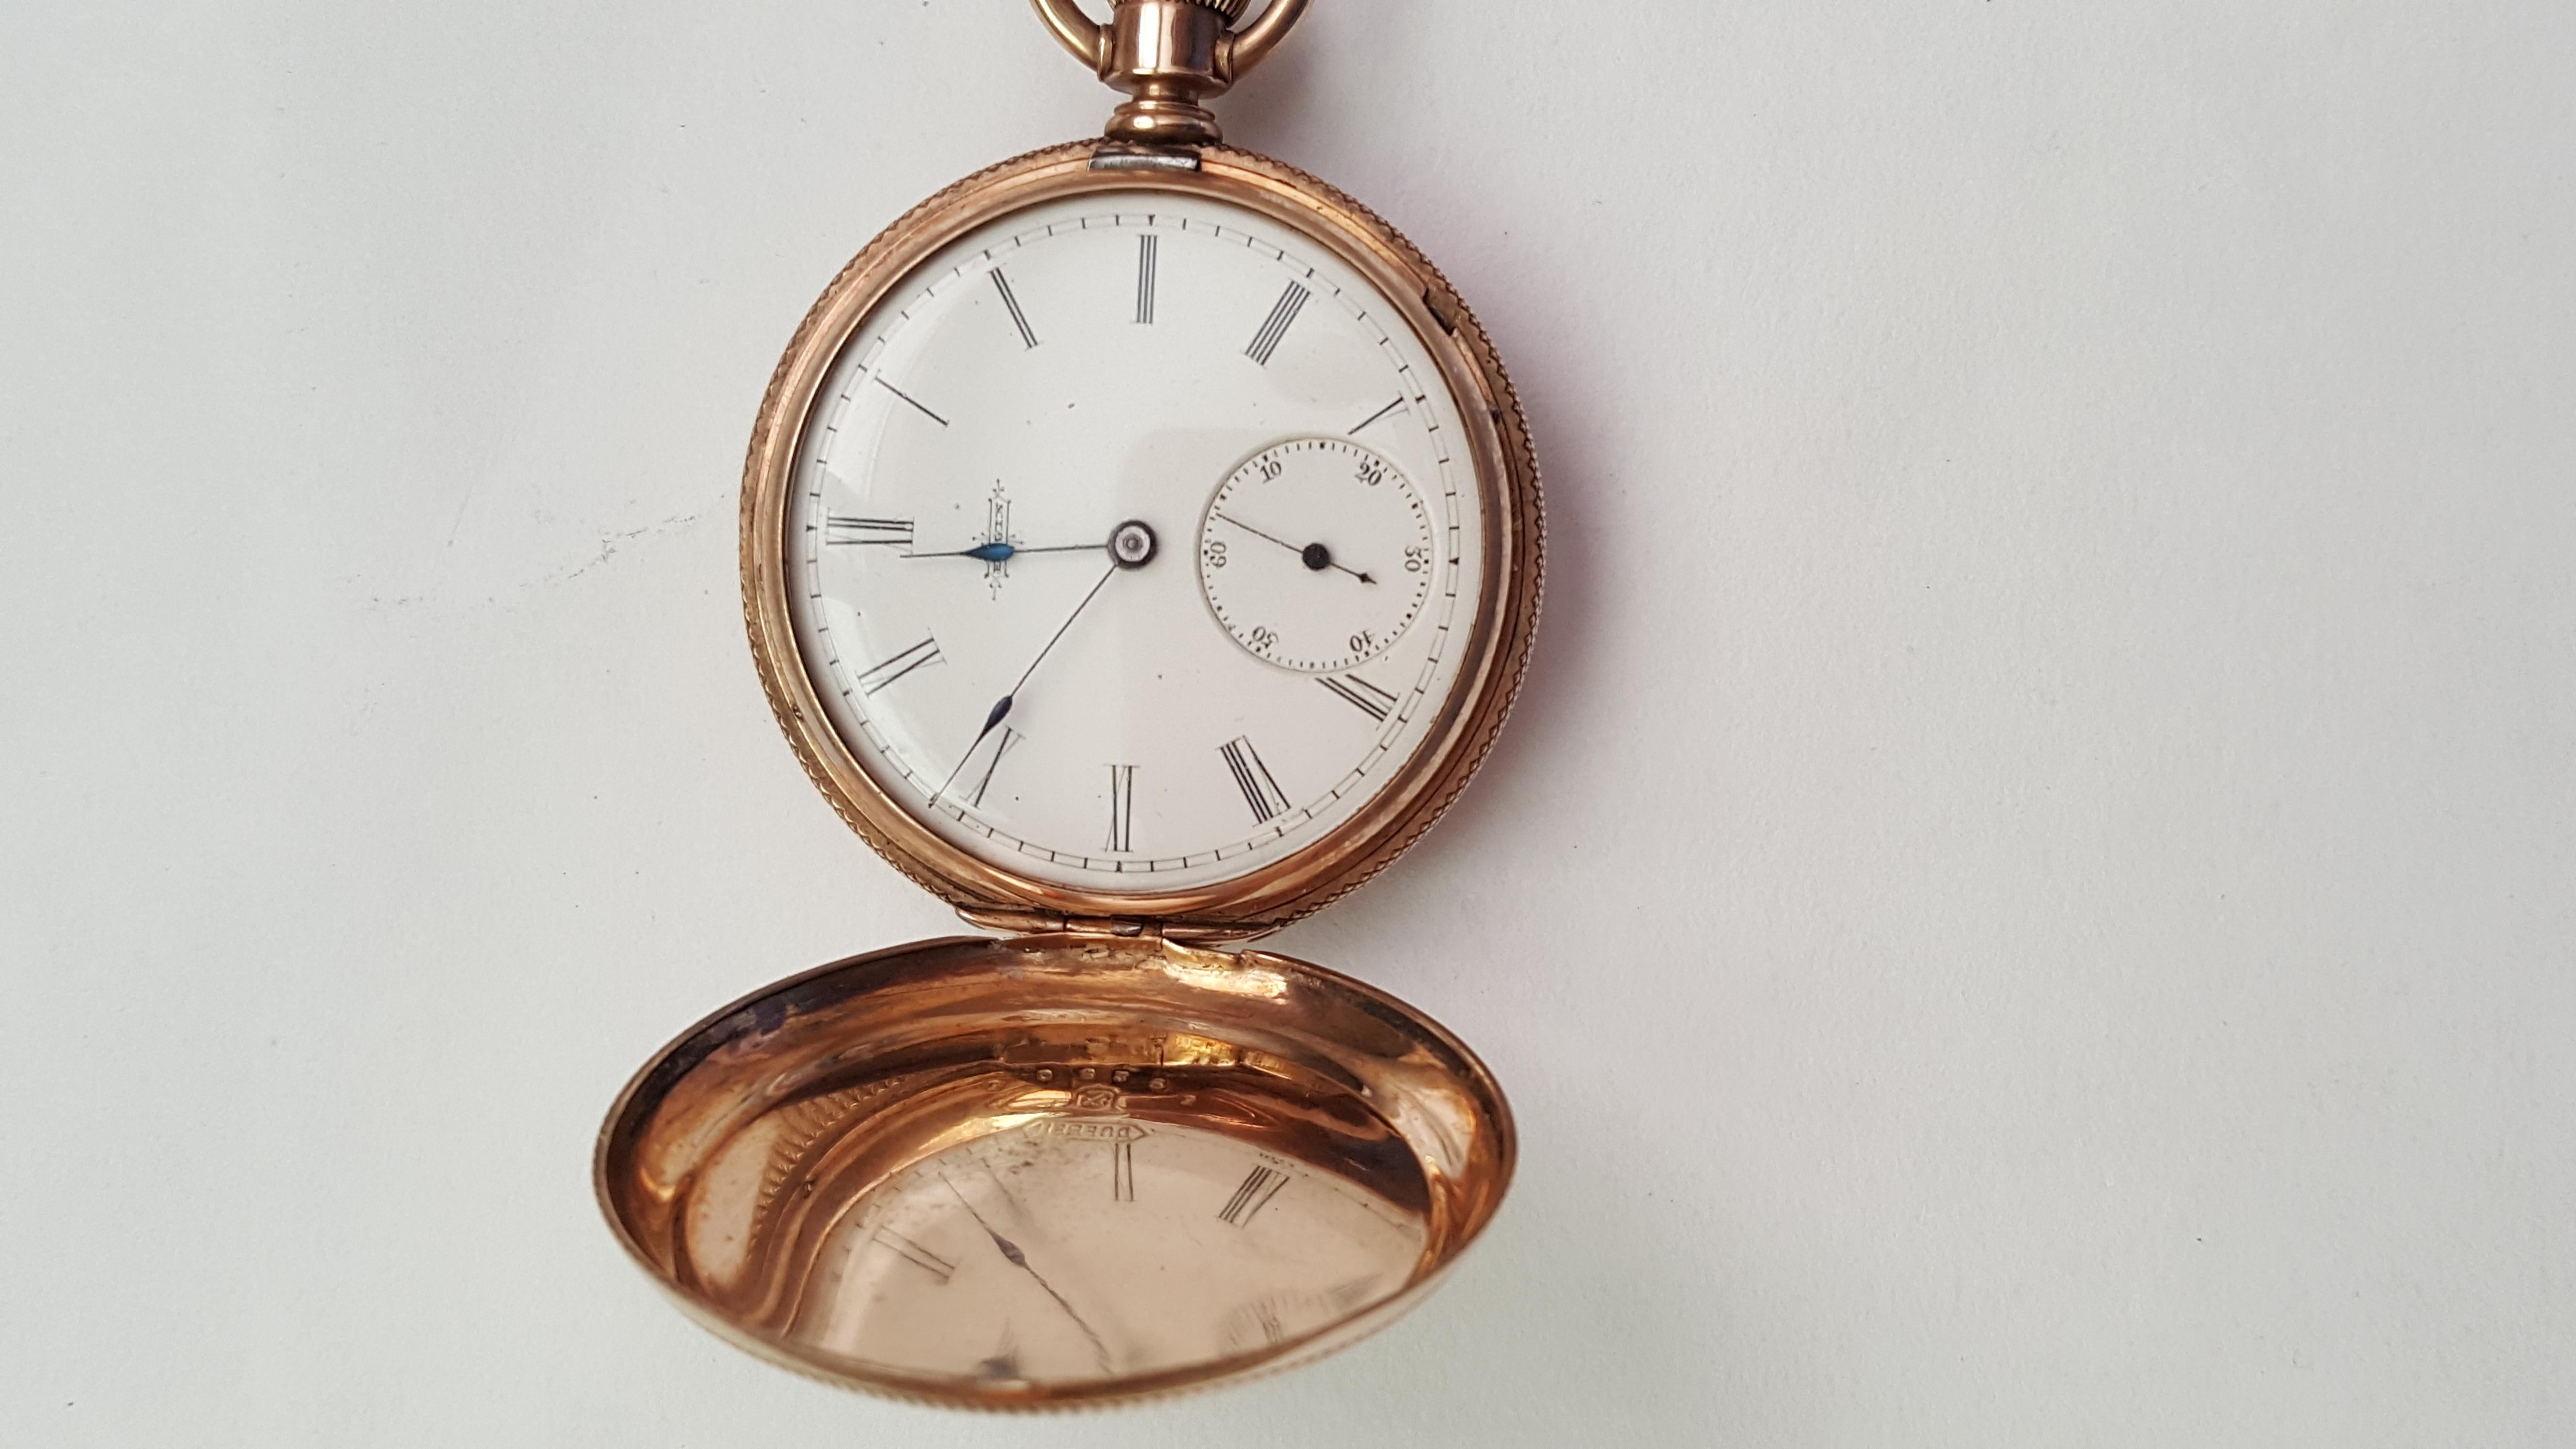 Vintage Gold-Plated Elgin Pocket Watch, Year 1883, Working, 11 Jewel 1